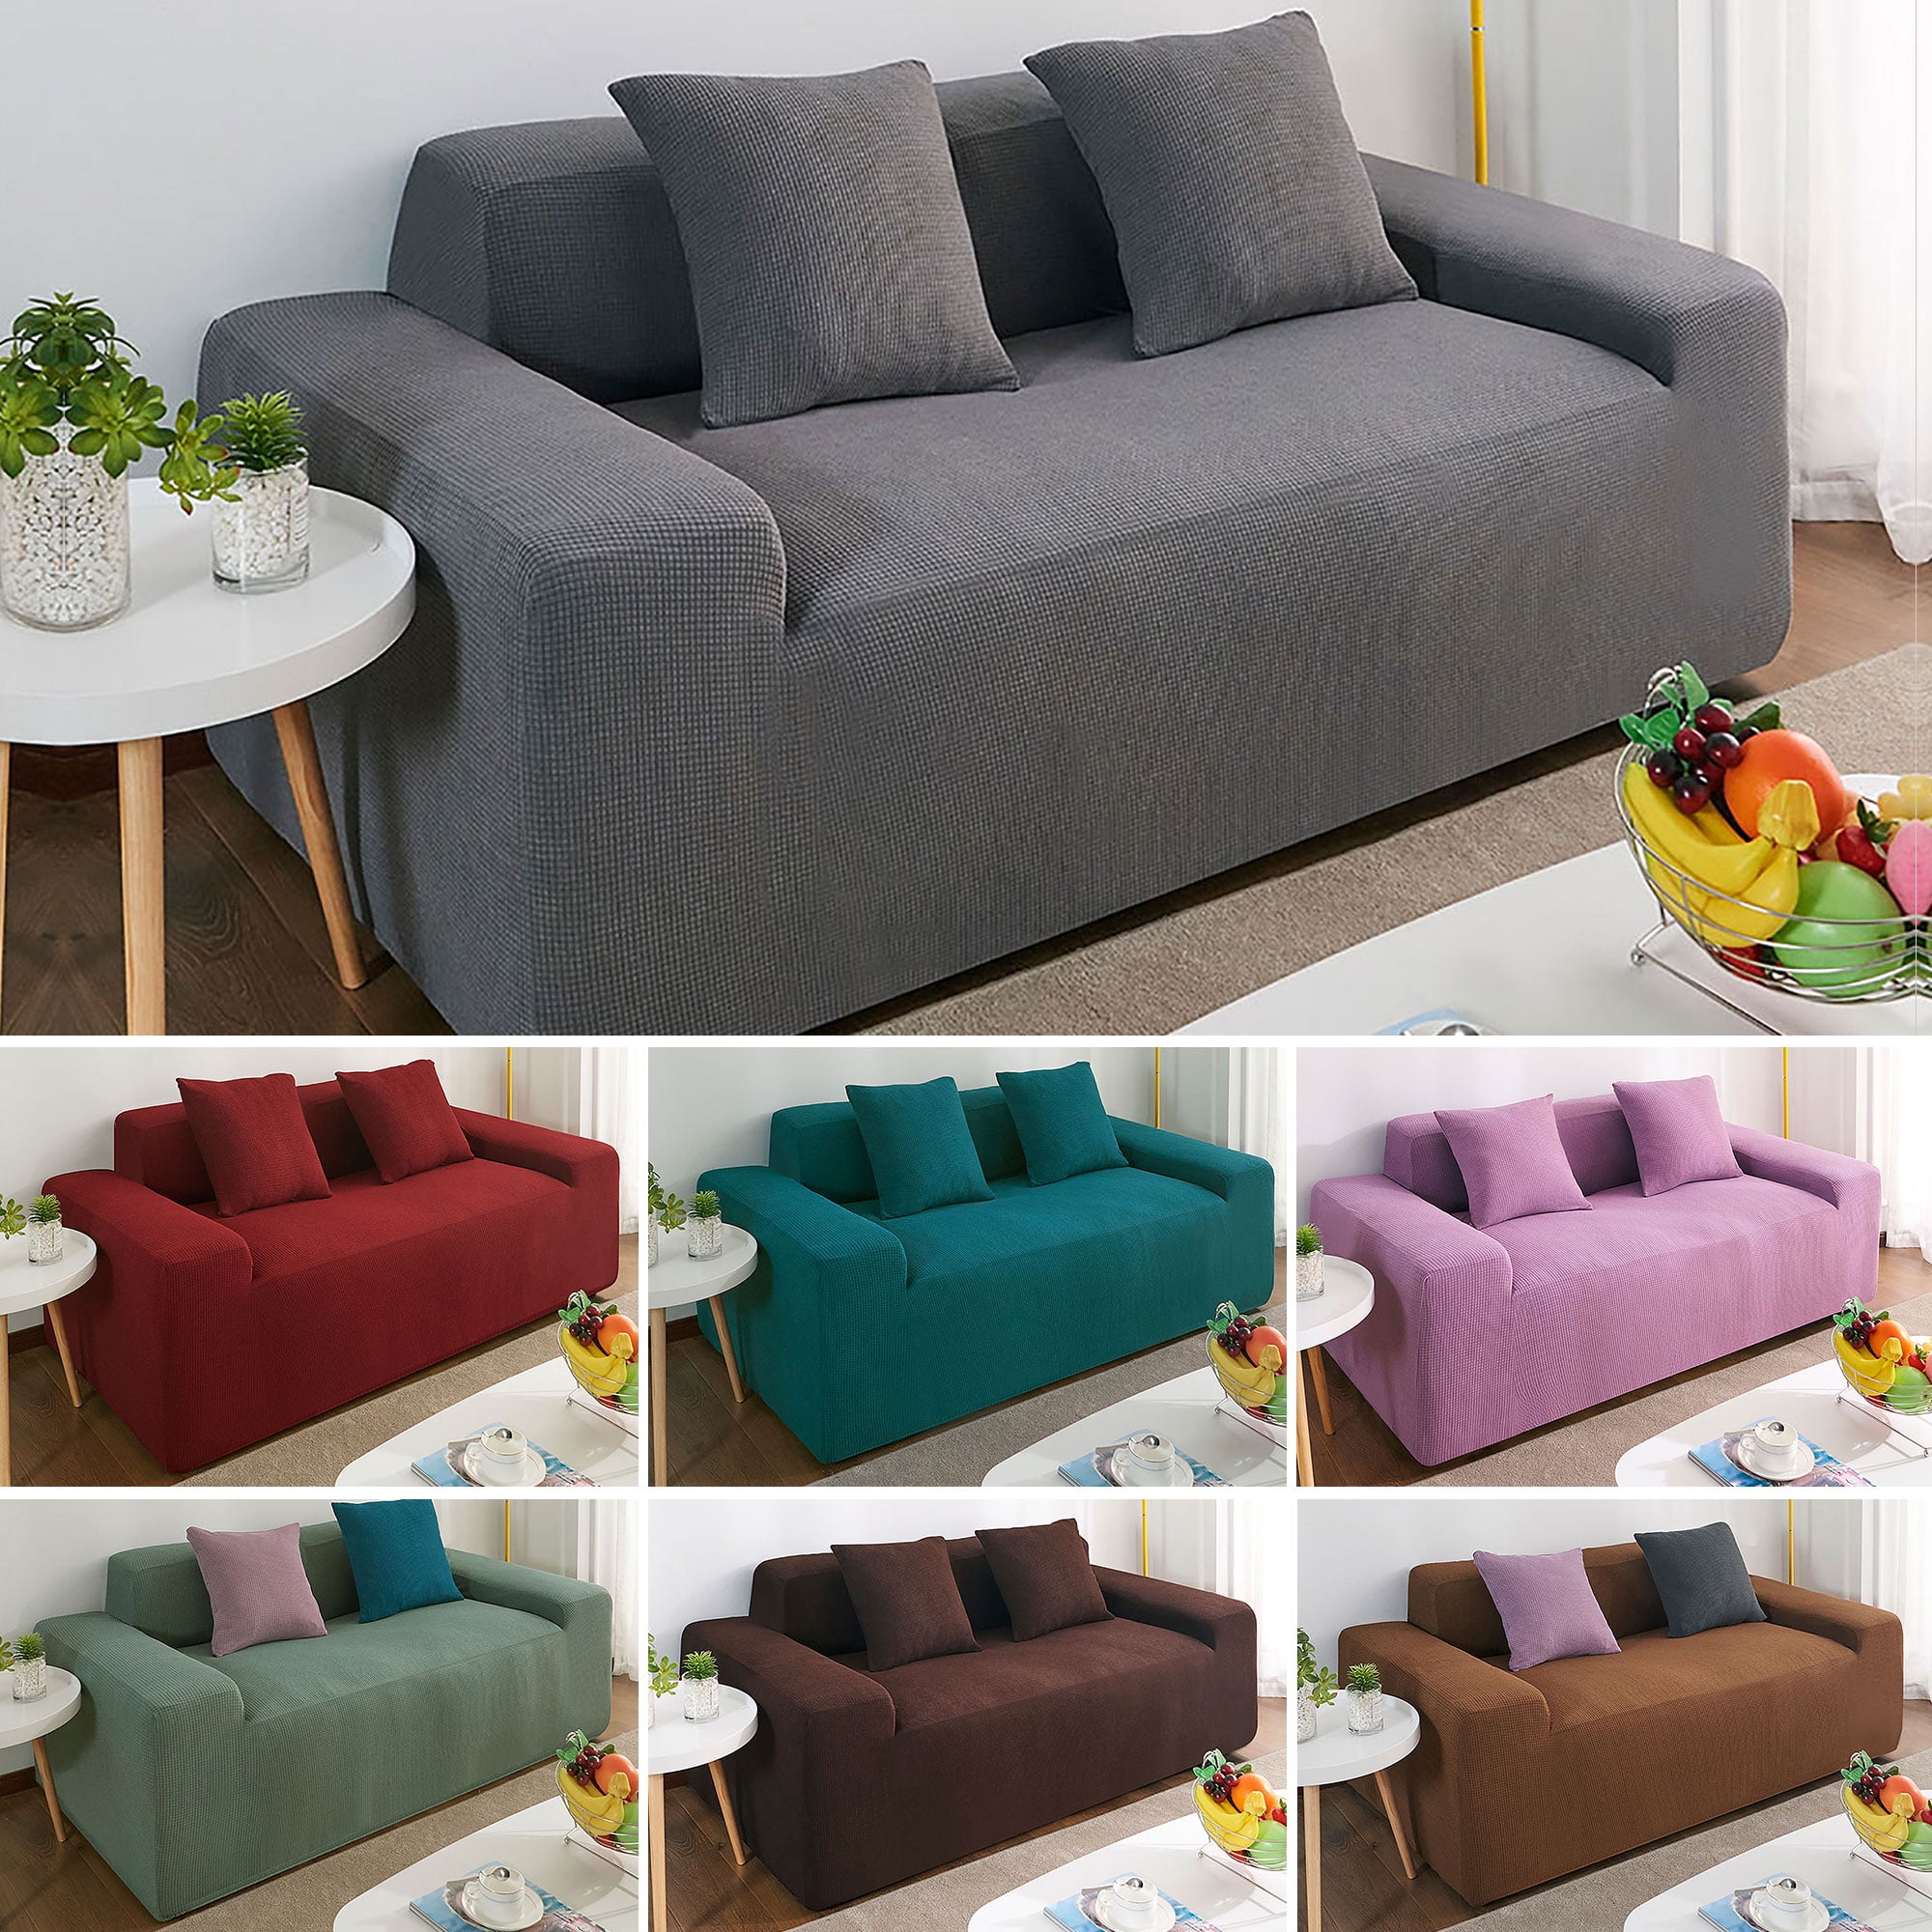 1-3 Seats Waterproof Stretchy Sofa Seat Cushion Cover Couch Slipcovers Protector 